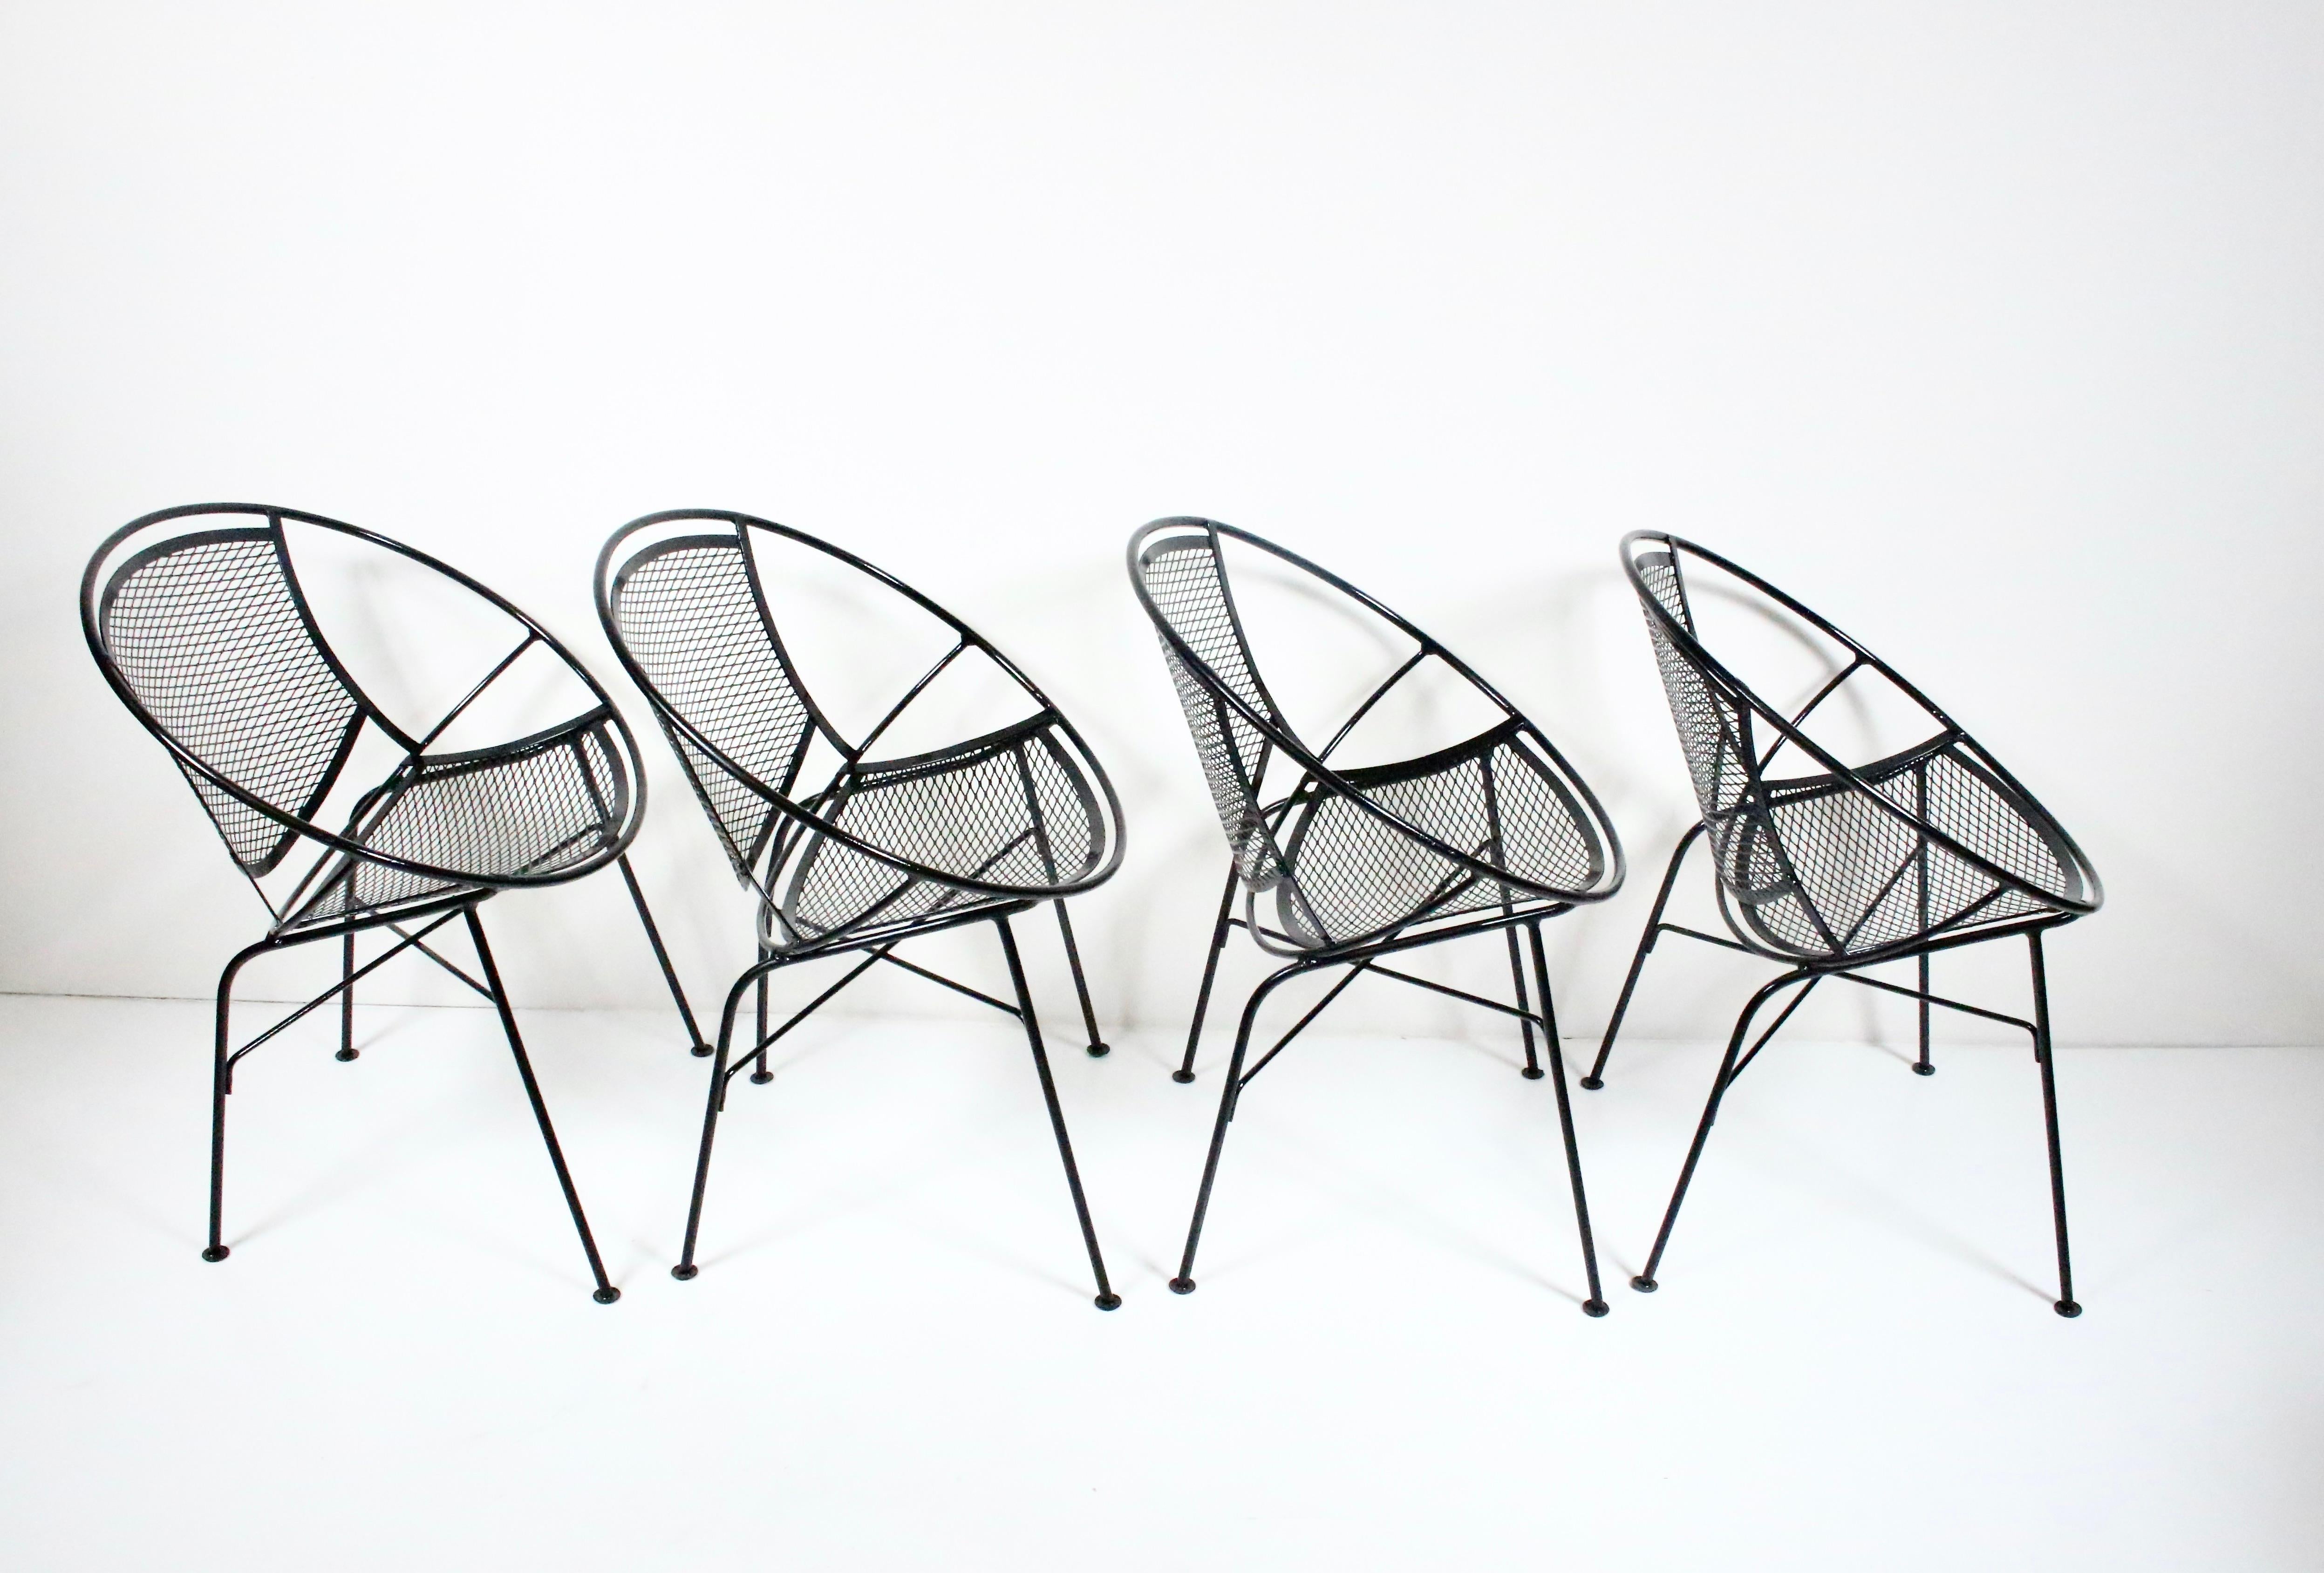 Original Maurizio Tempestini for Salterini set of four black radar dining armchairs. Featuring a sculpted sturdy hoop framework in black enameled wrought iron and sturdy wire mesh. Indoor outdoor seating. American Mid-Century Modern. Classic.